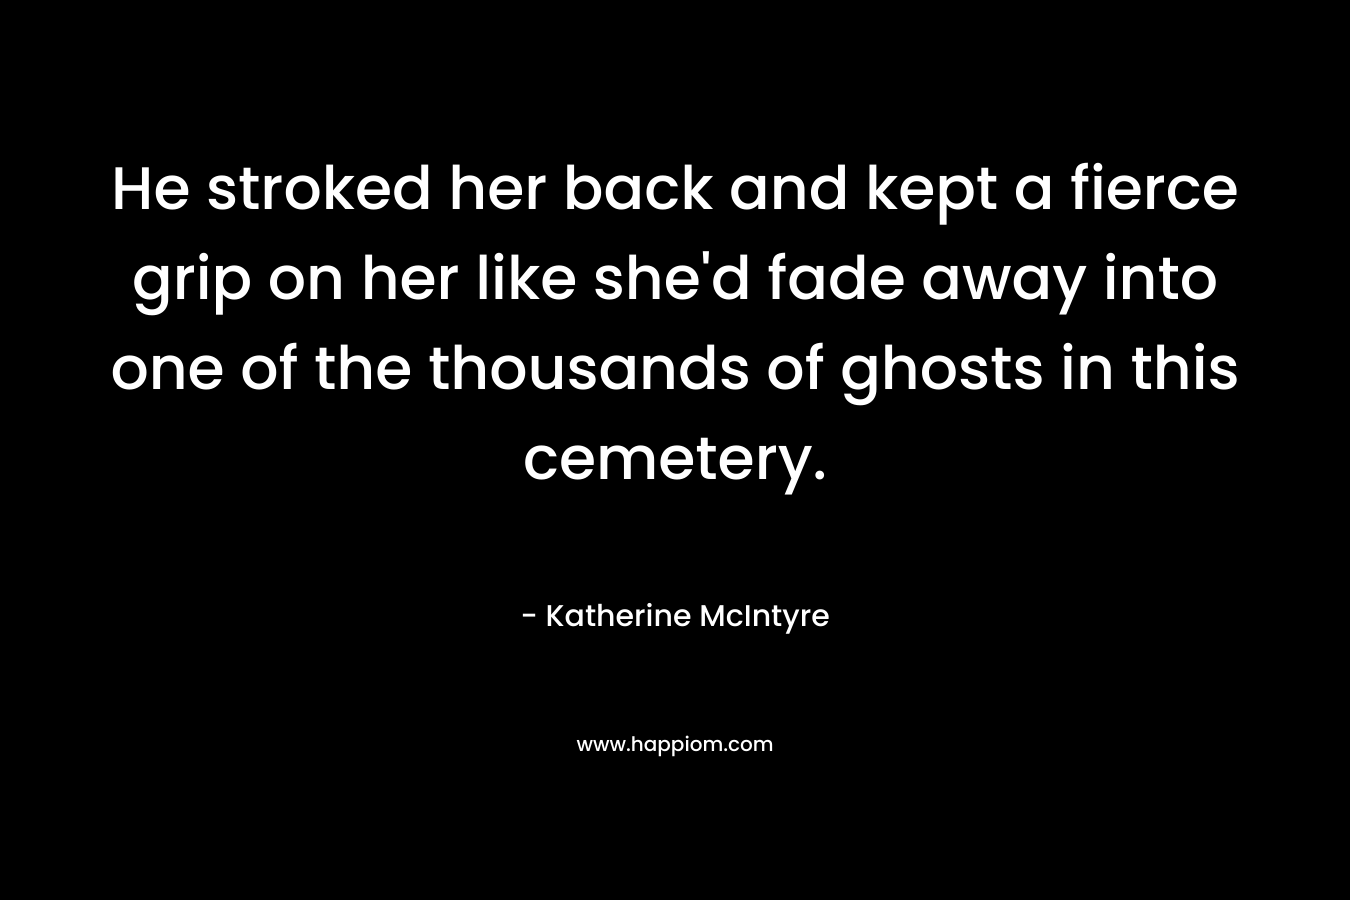 He stroked her back and kept a fierce grip on her like she'd fade away into one of the thousands of ghosts in this cemetery.